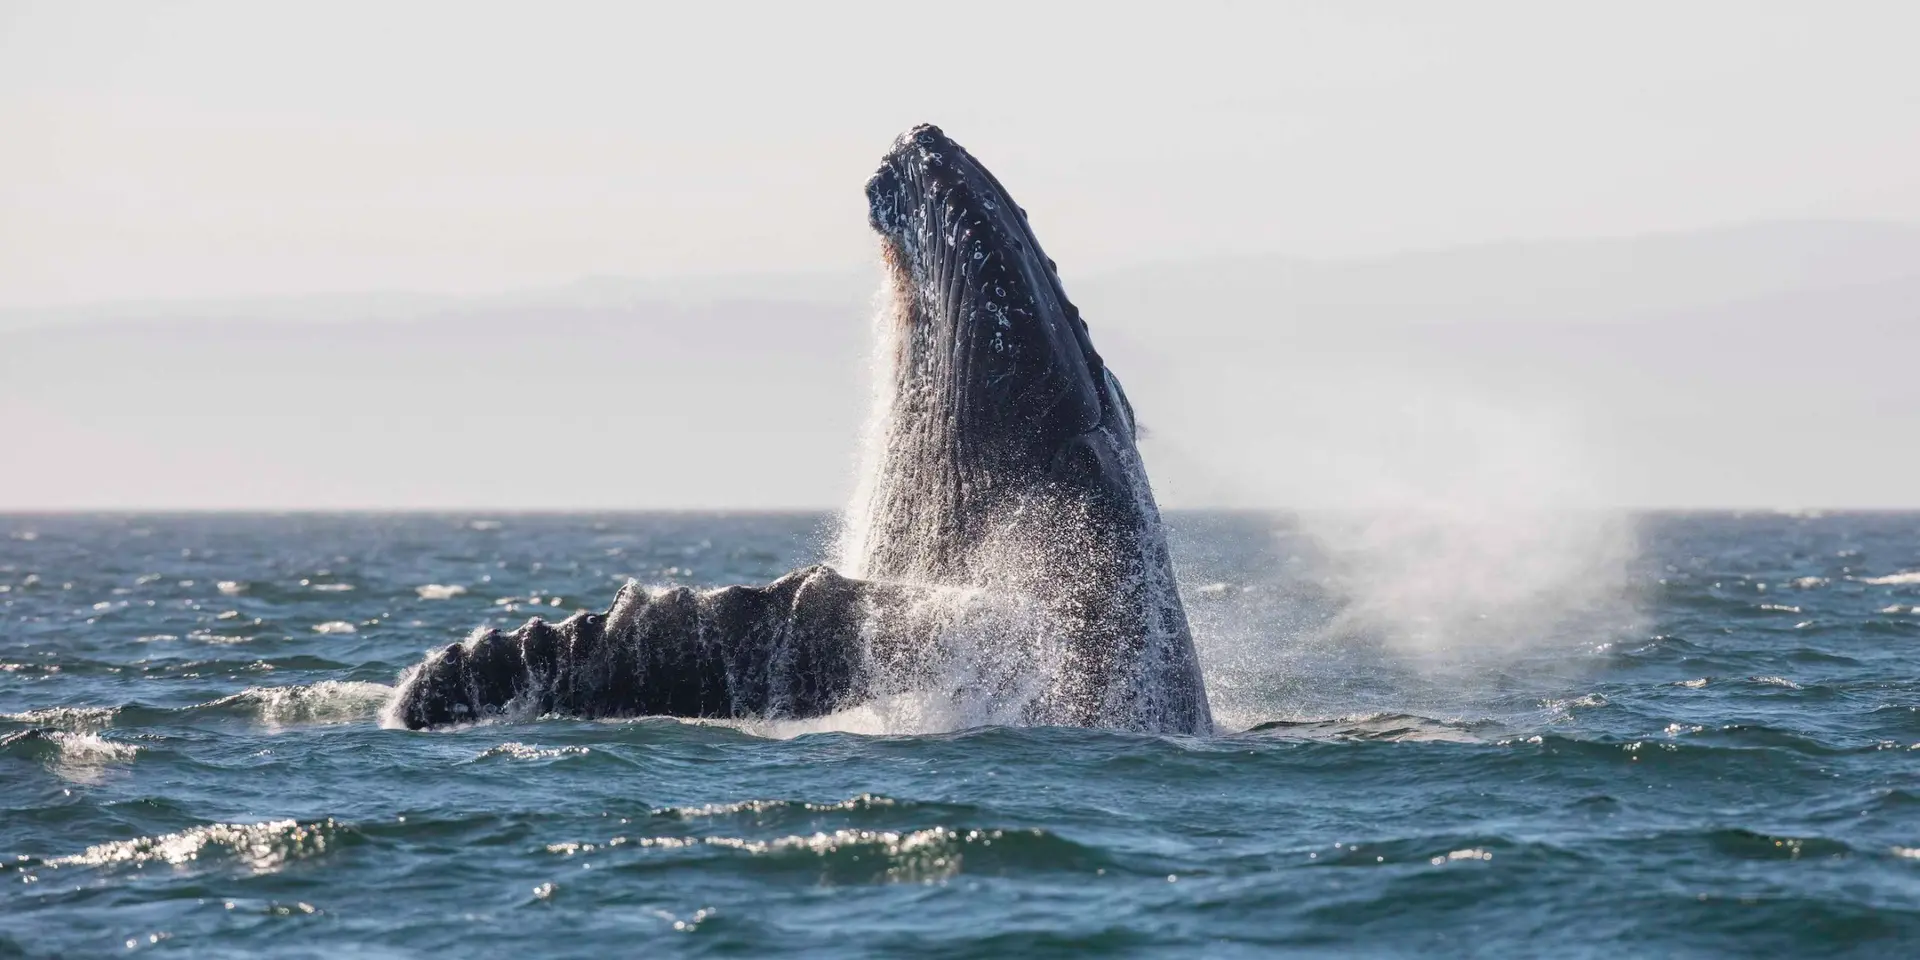 Humpback whales are making an extraordinary comeback in the Salish Sea. Come on out with us and say hello!